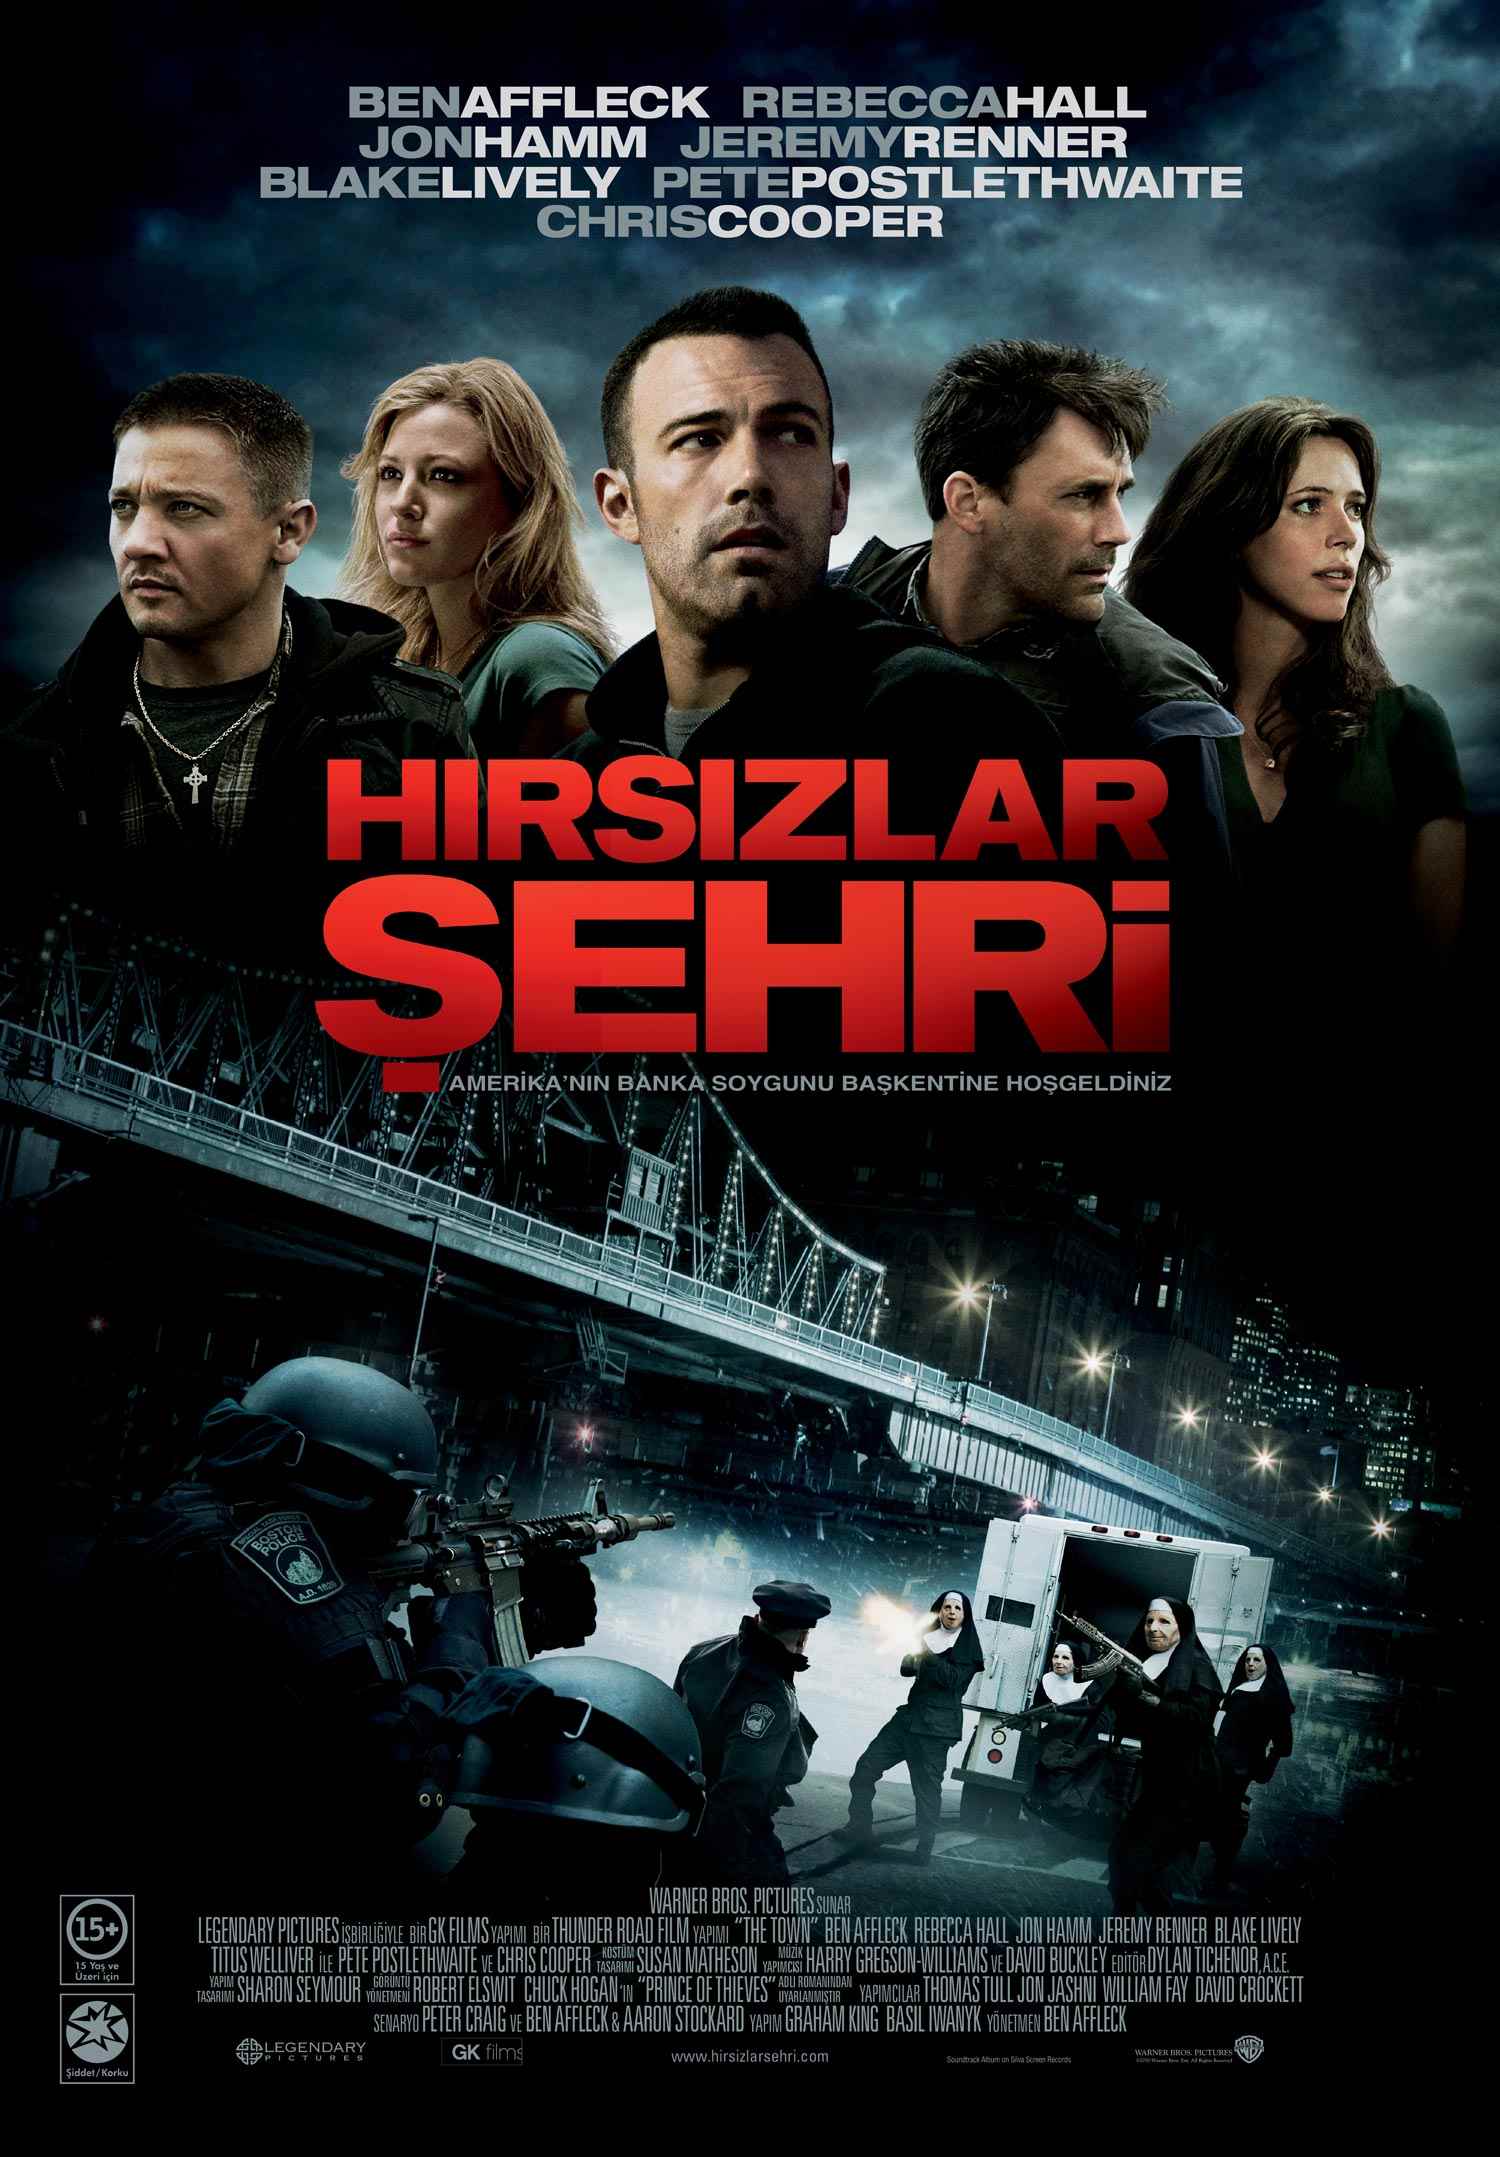 The Town (2010) Extended Cut 640Kbps 23.976Fps 48Khz 5.1Ch BluRay Turkish Audio TAC